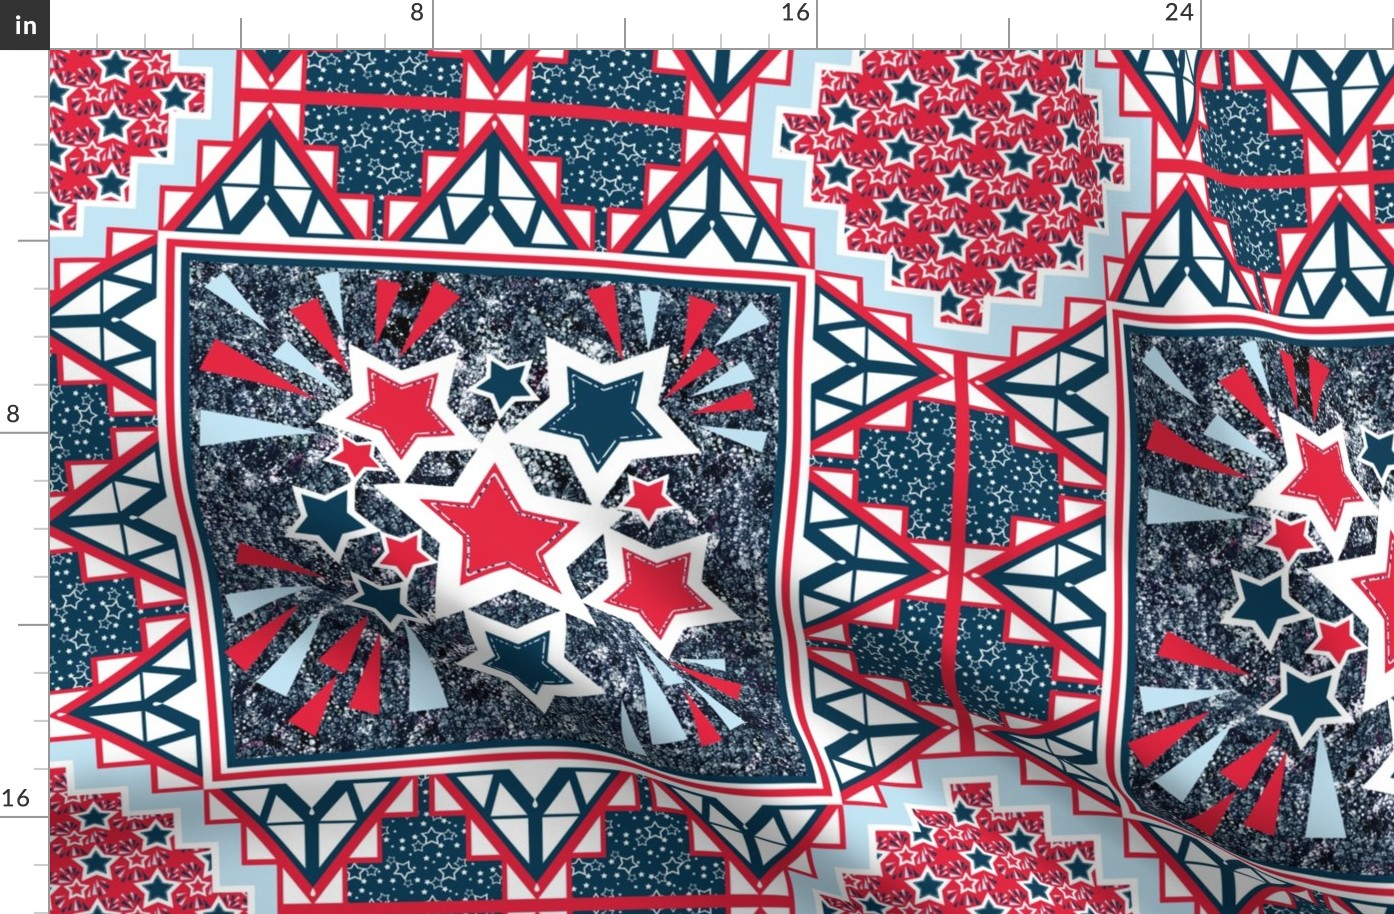 Parade Blanket Wholecloth Quilt for 4th of July in Red, White, Blue